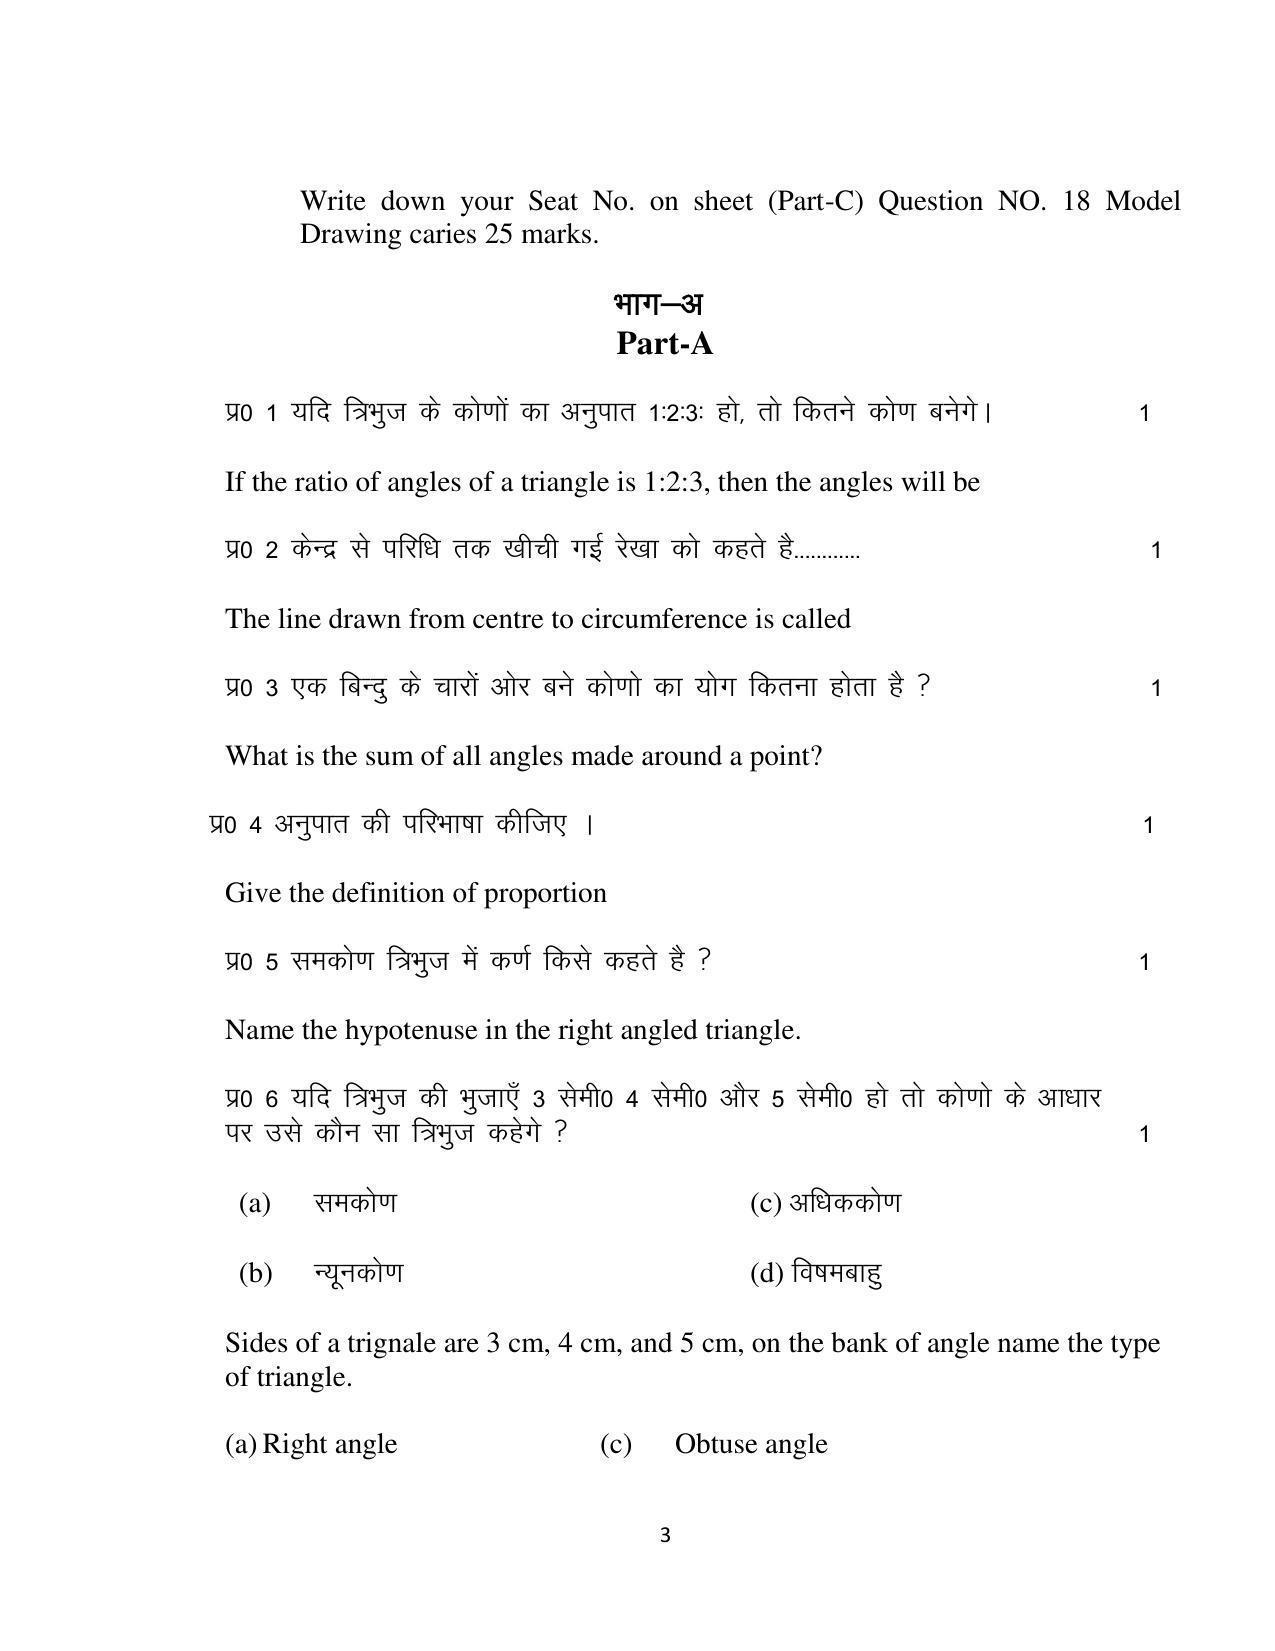 UP Board Class 10 Half Yearly Question Paper 2022-23 Drawing